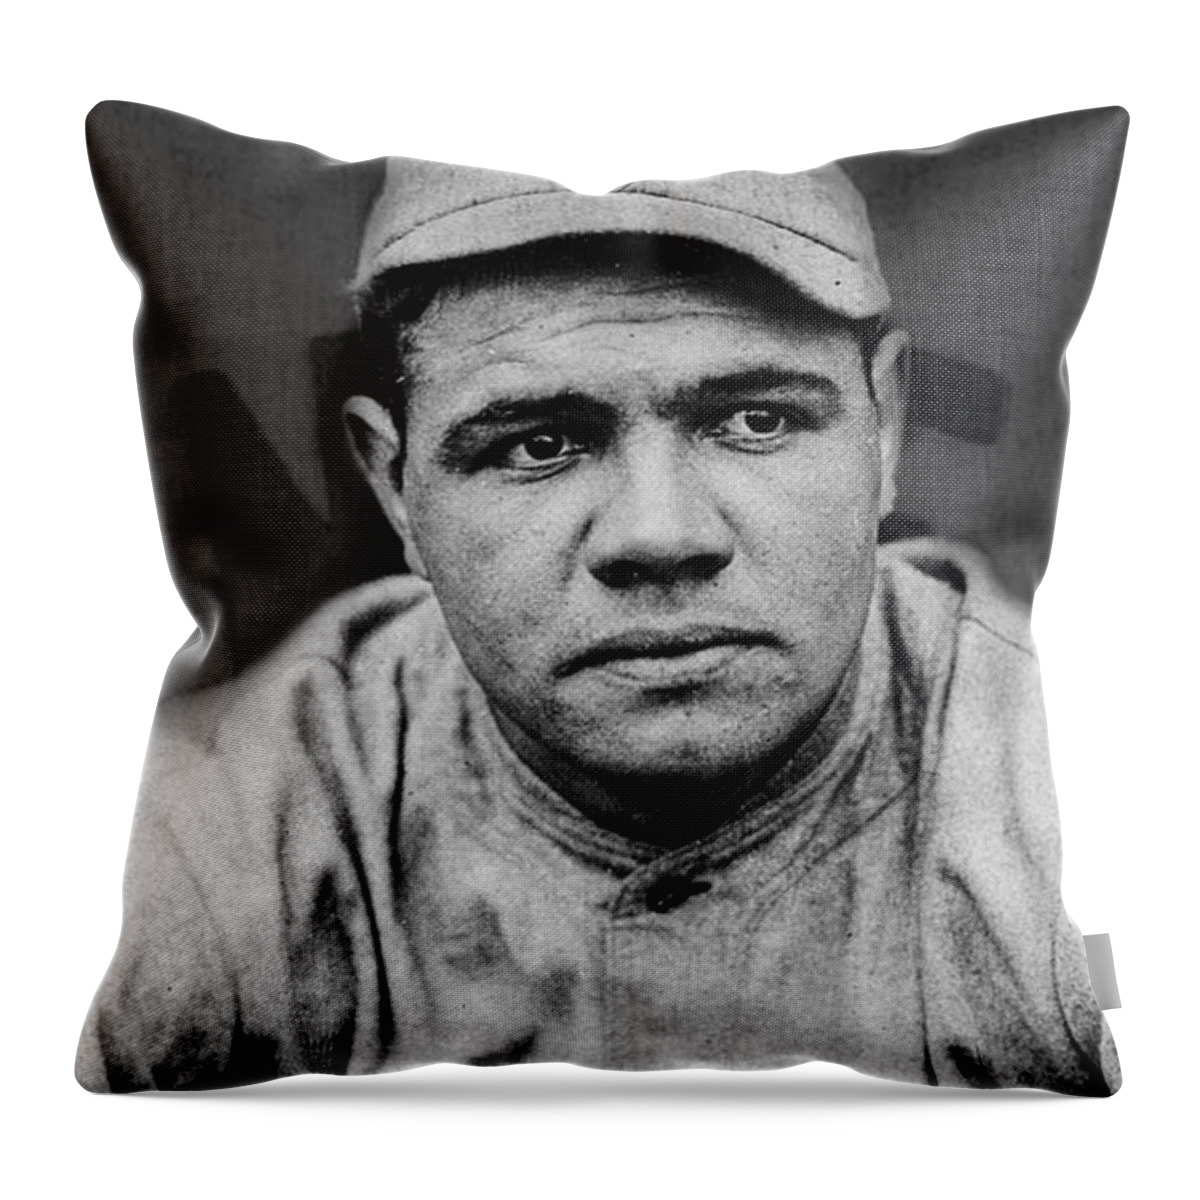 Babe Ruth Throw Pillow featuring the digital art Babe Ruth by Paul Lovering